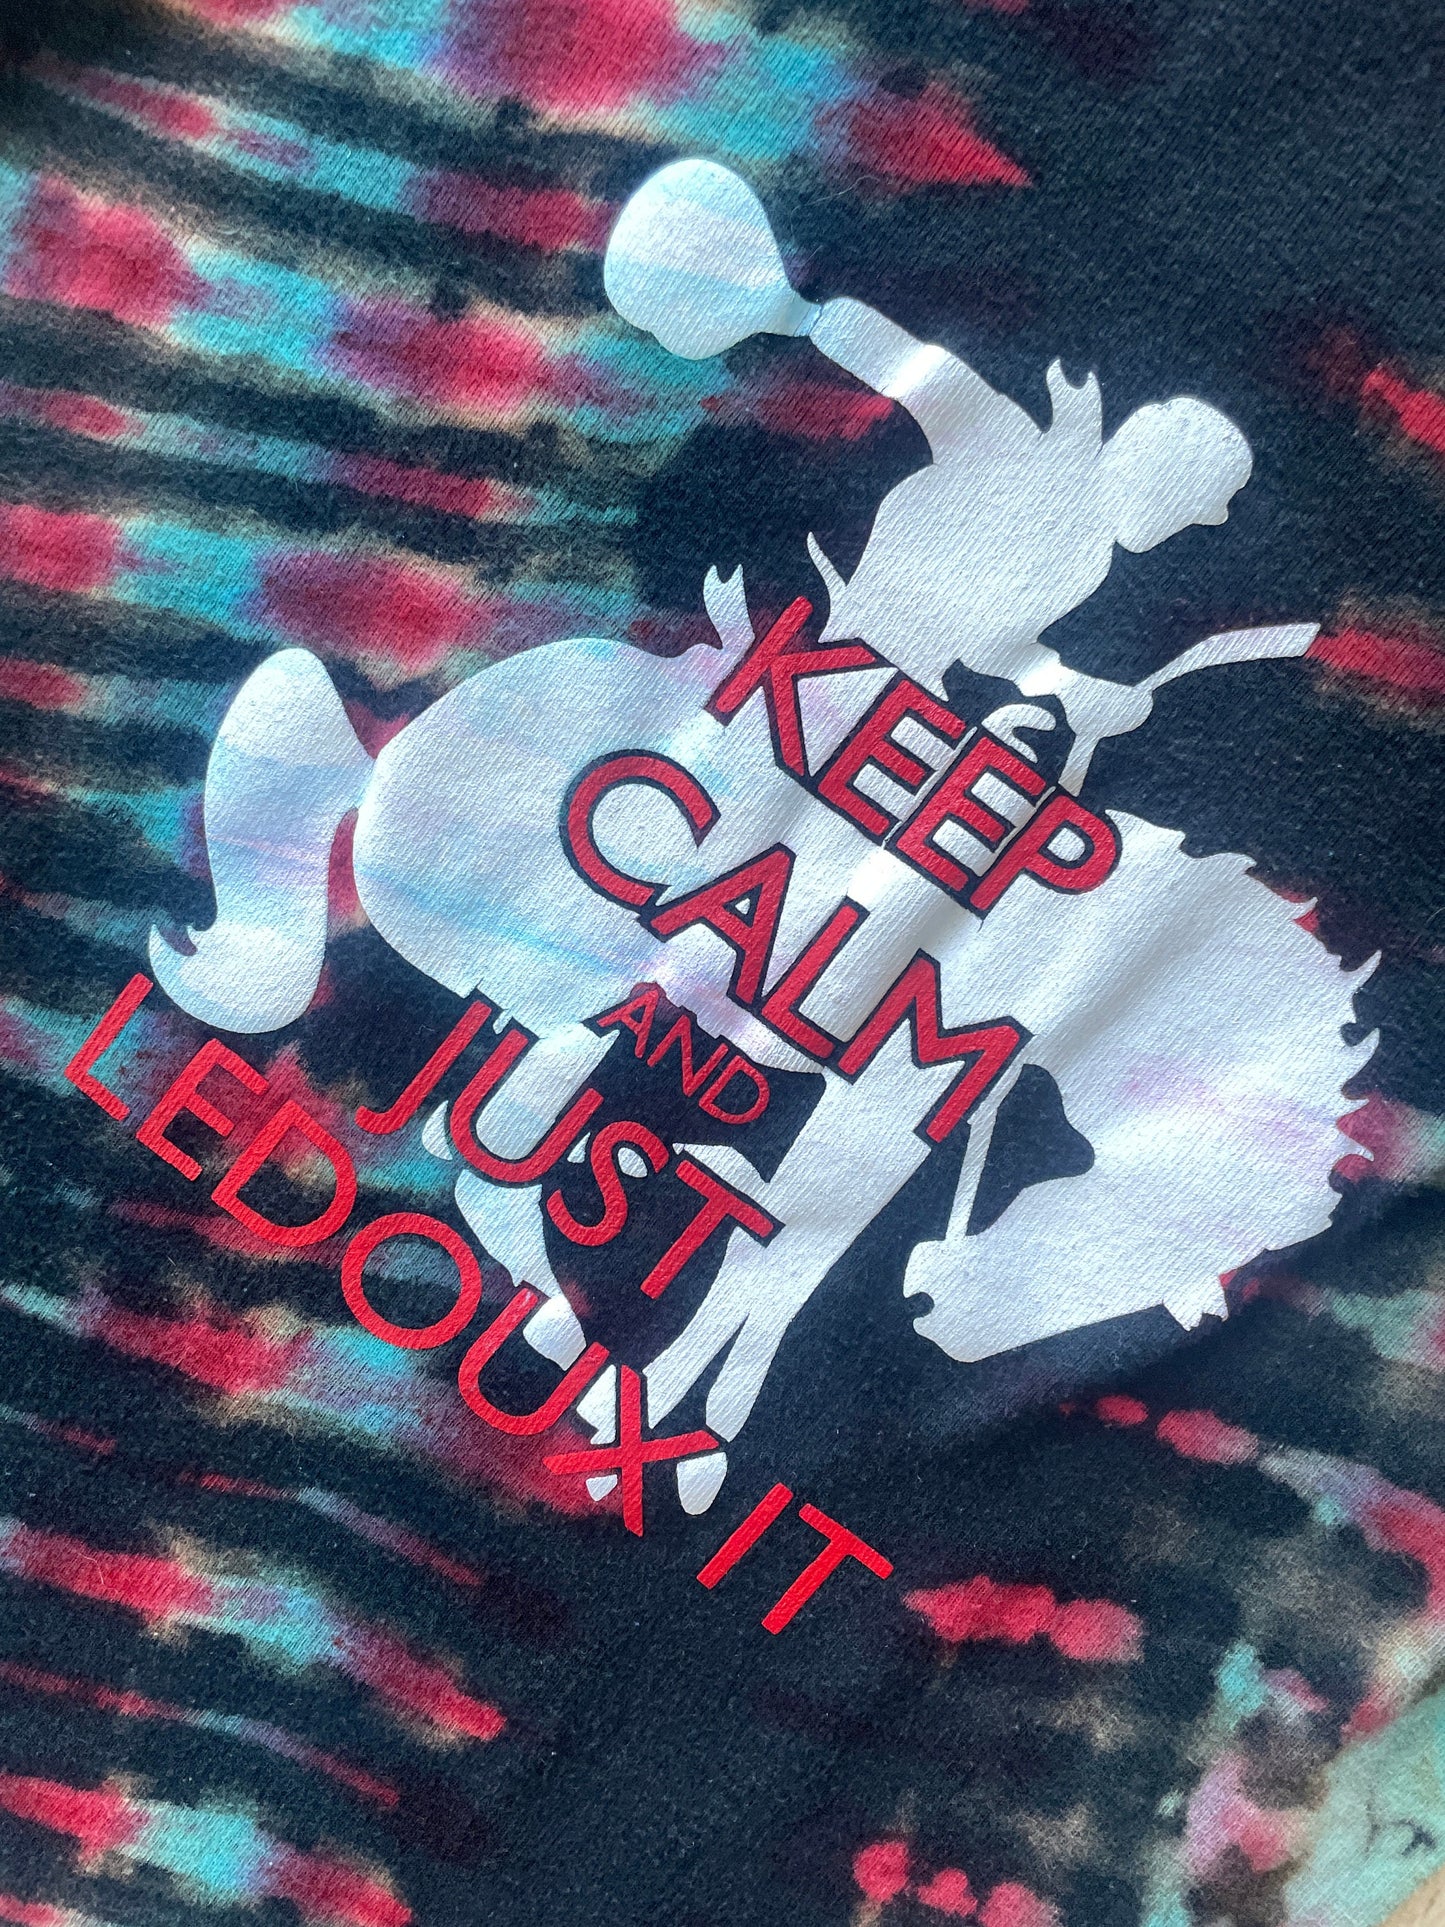 LARGE Women's Chris LeDoux Keep Calm and LeDoux On Handmade Tie Dye Short Sleeve TShirt | One-Of-a-Kind Upcycled Red, Black, and Blue Top